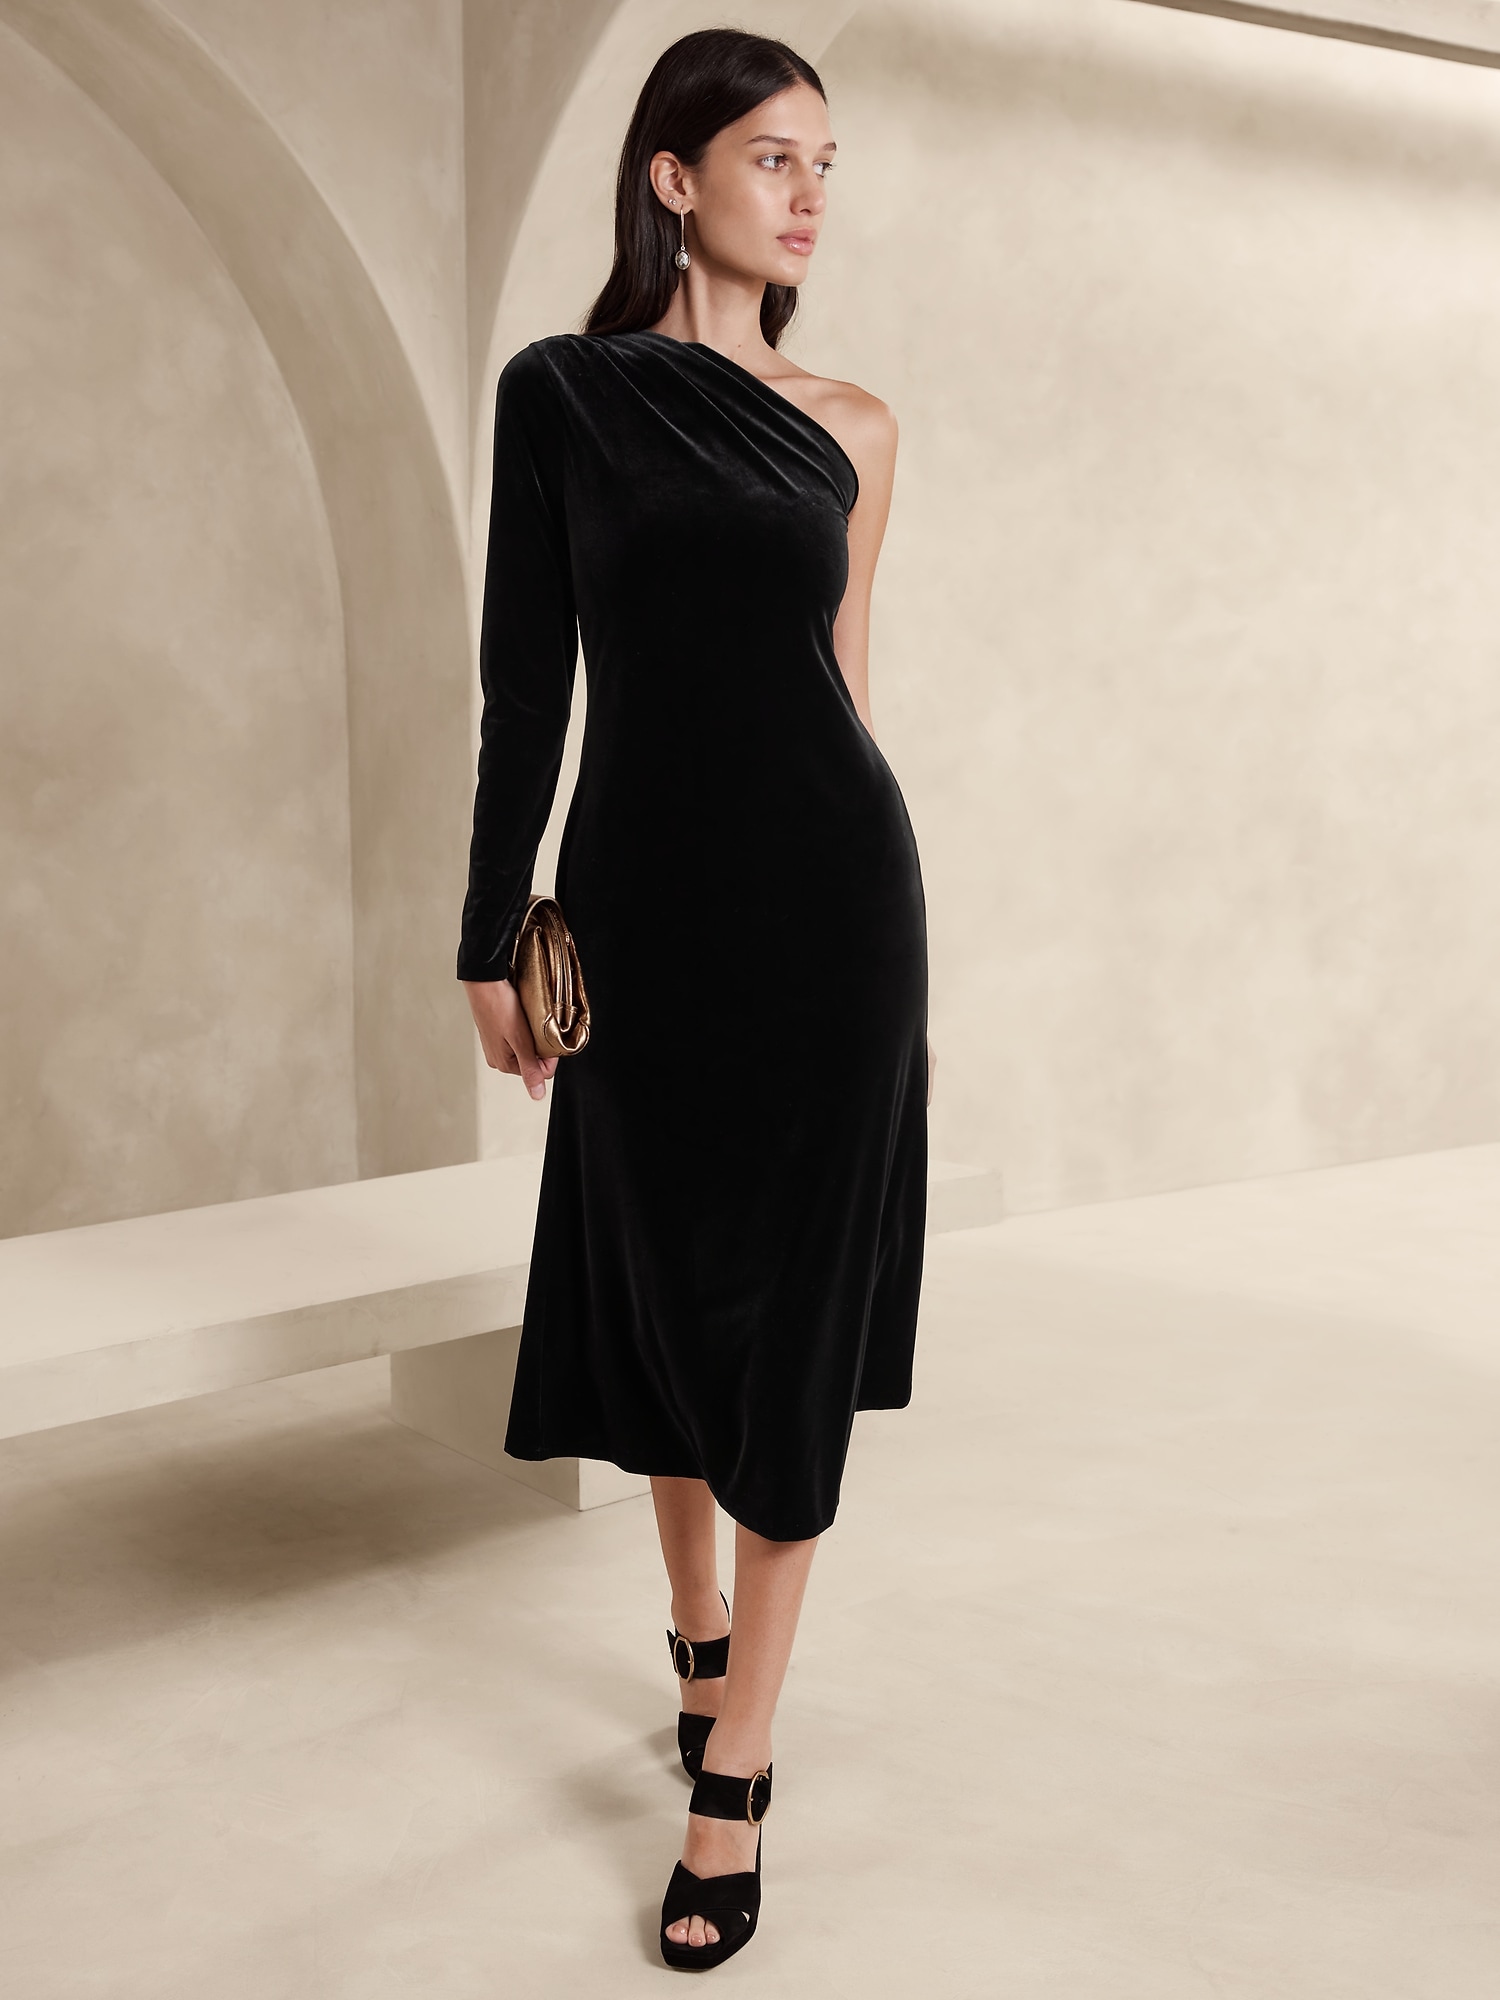 Wine Color One Shoulder Long Sleeve Dress style LD 4296 - Prom-Avenue